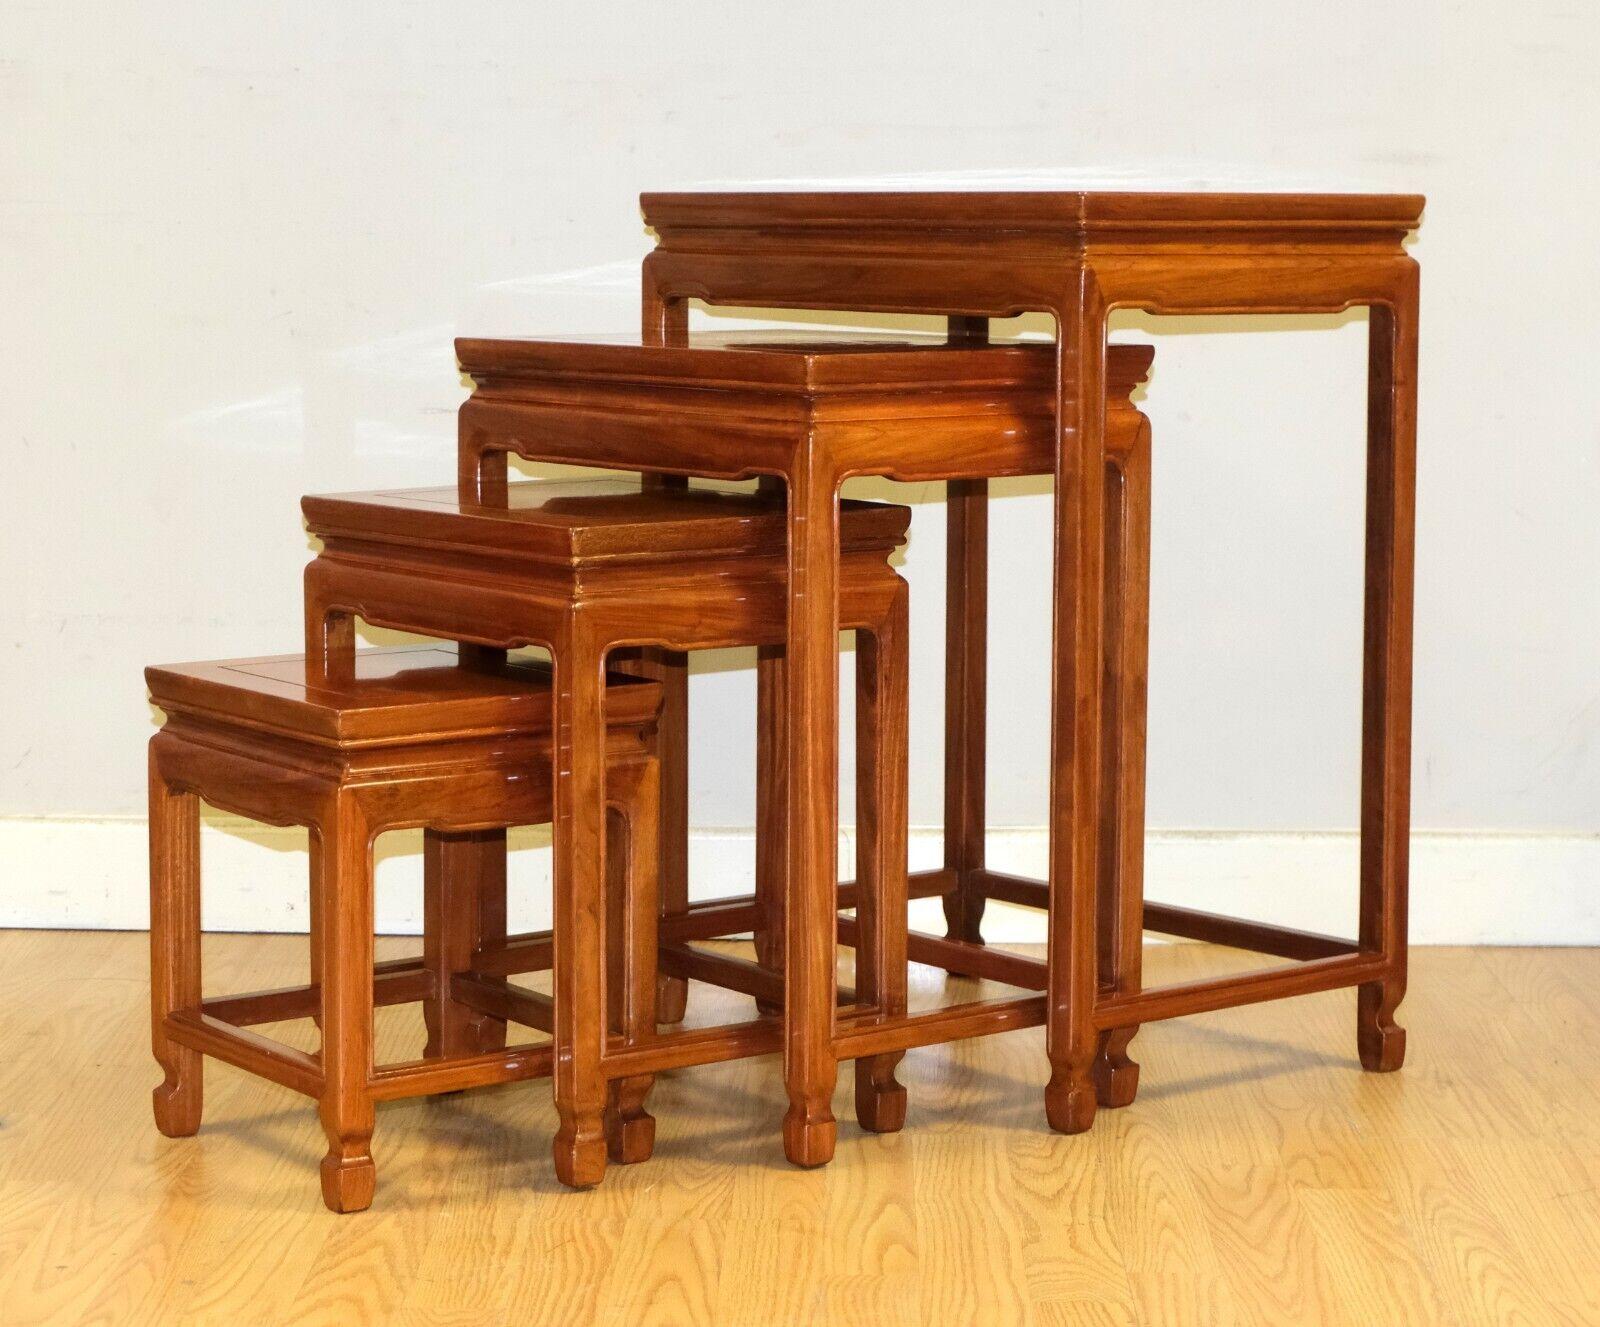 We are delighted to offer for sale this lovely set of four Chinese hardwood nests of tables on hoof feet . 

This well made, simple but elegant set is a great addition to any room. The items are presented with lovely moulded tops, supported on